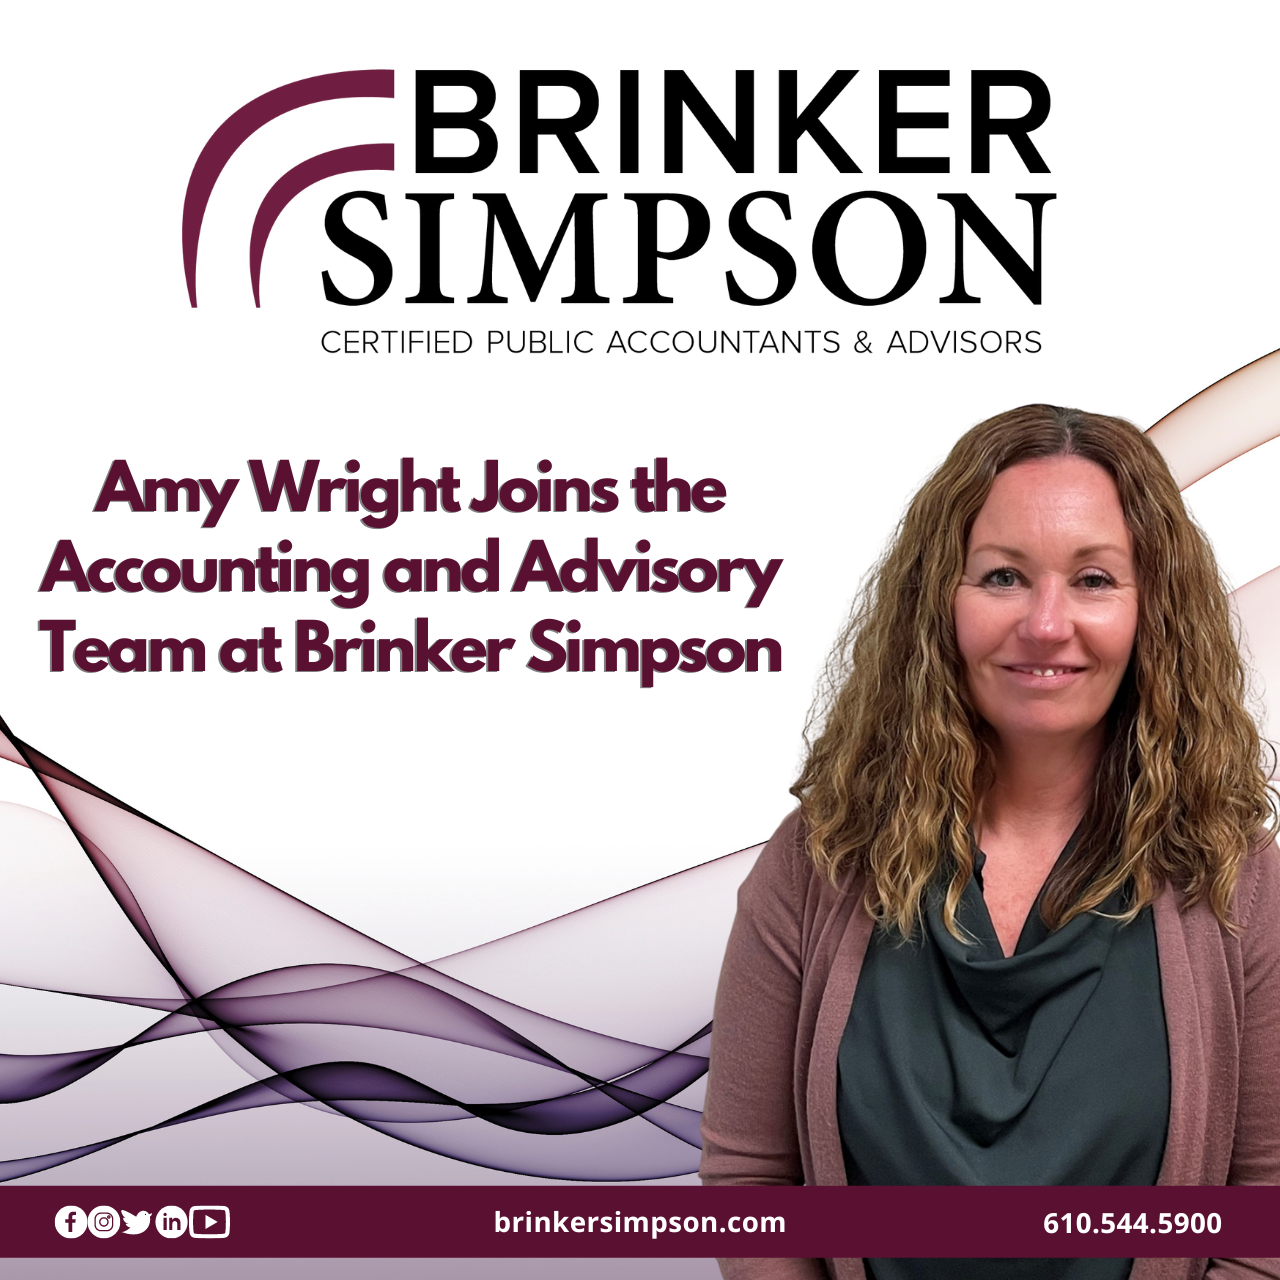 Amy Wright Joins the Accounting and Advisory Team at Brinker Simpson